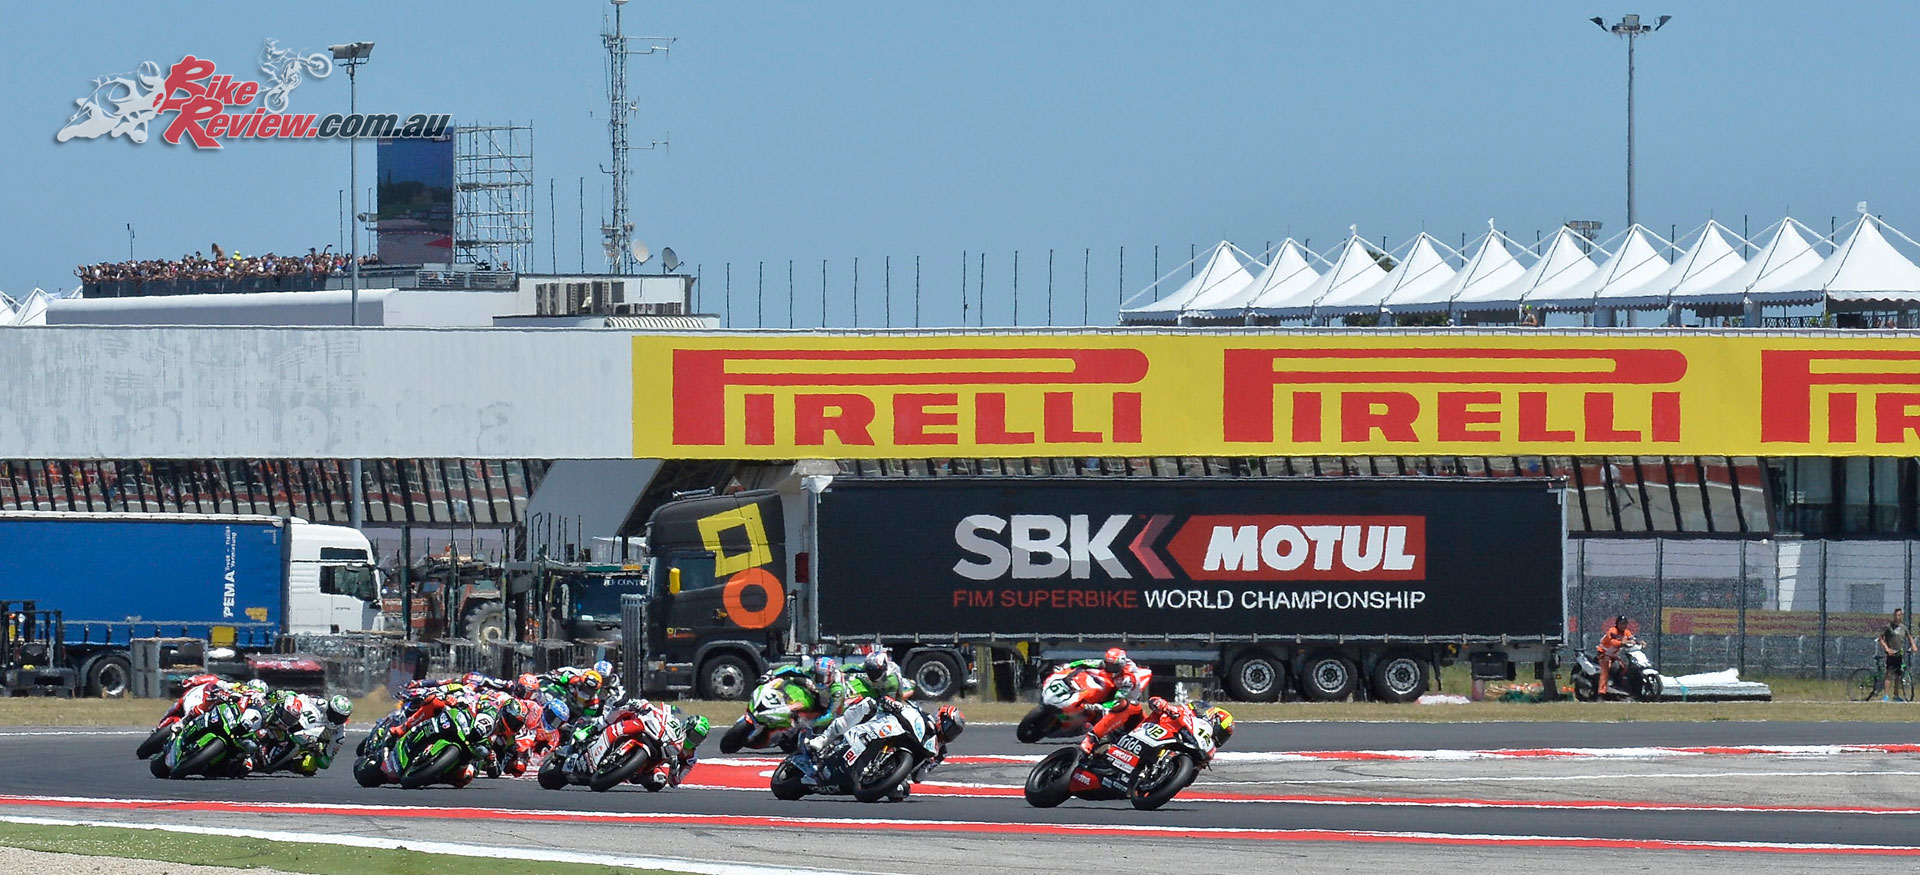 Pirelli to be official tyre supplier for all classes of WorldSBK for 2019 and 2020